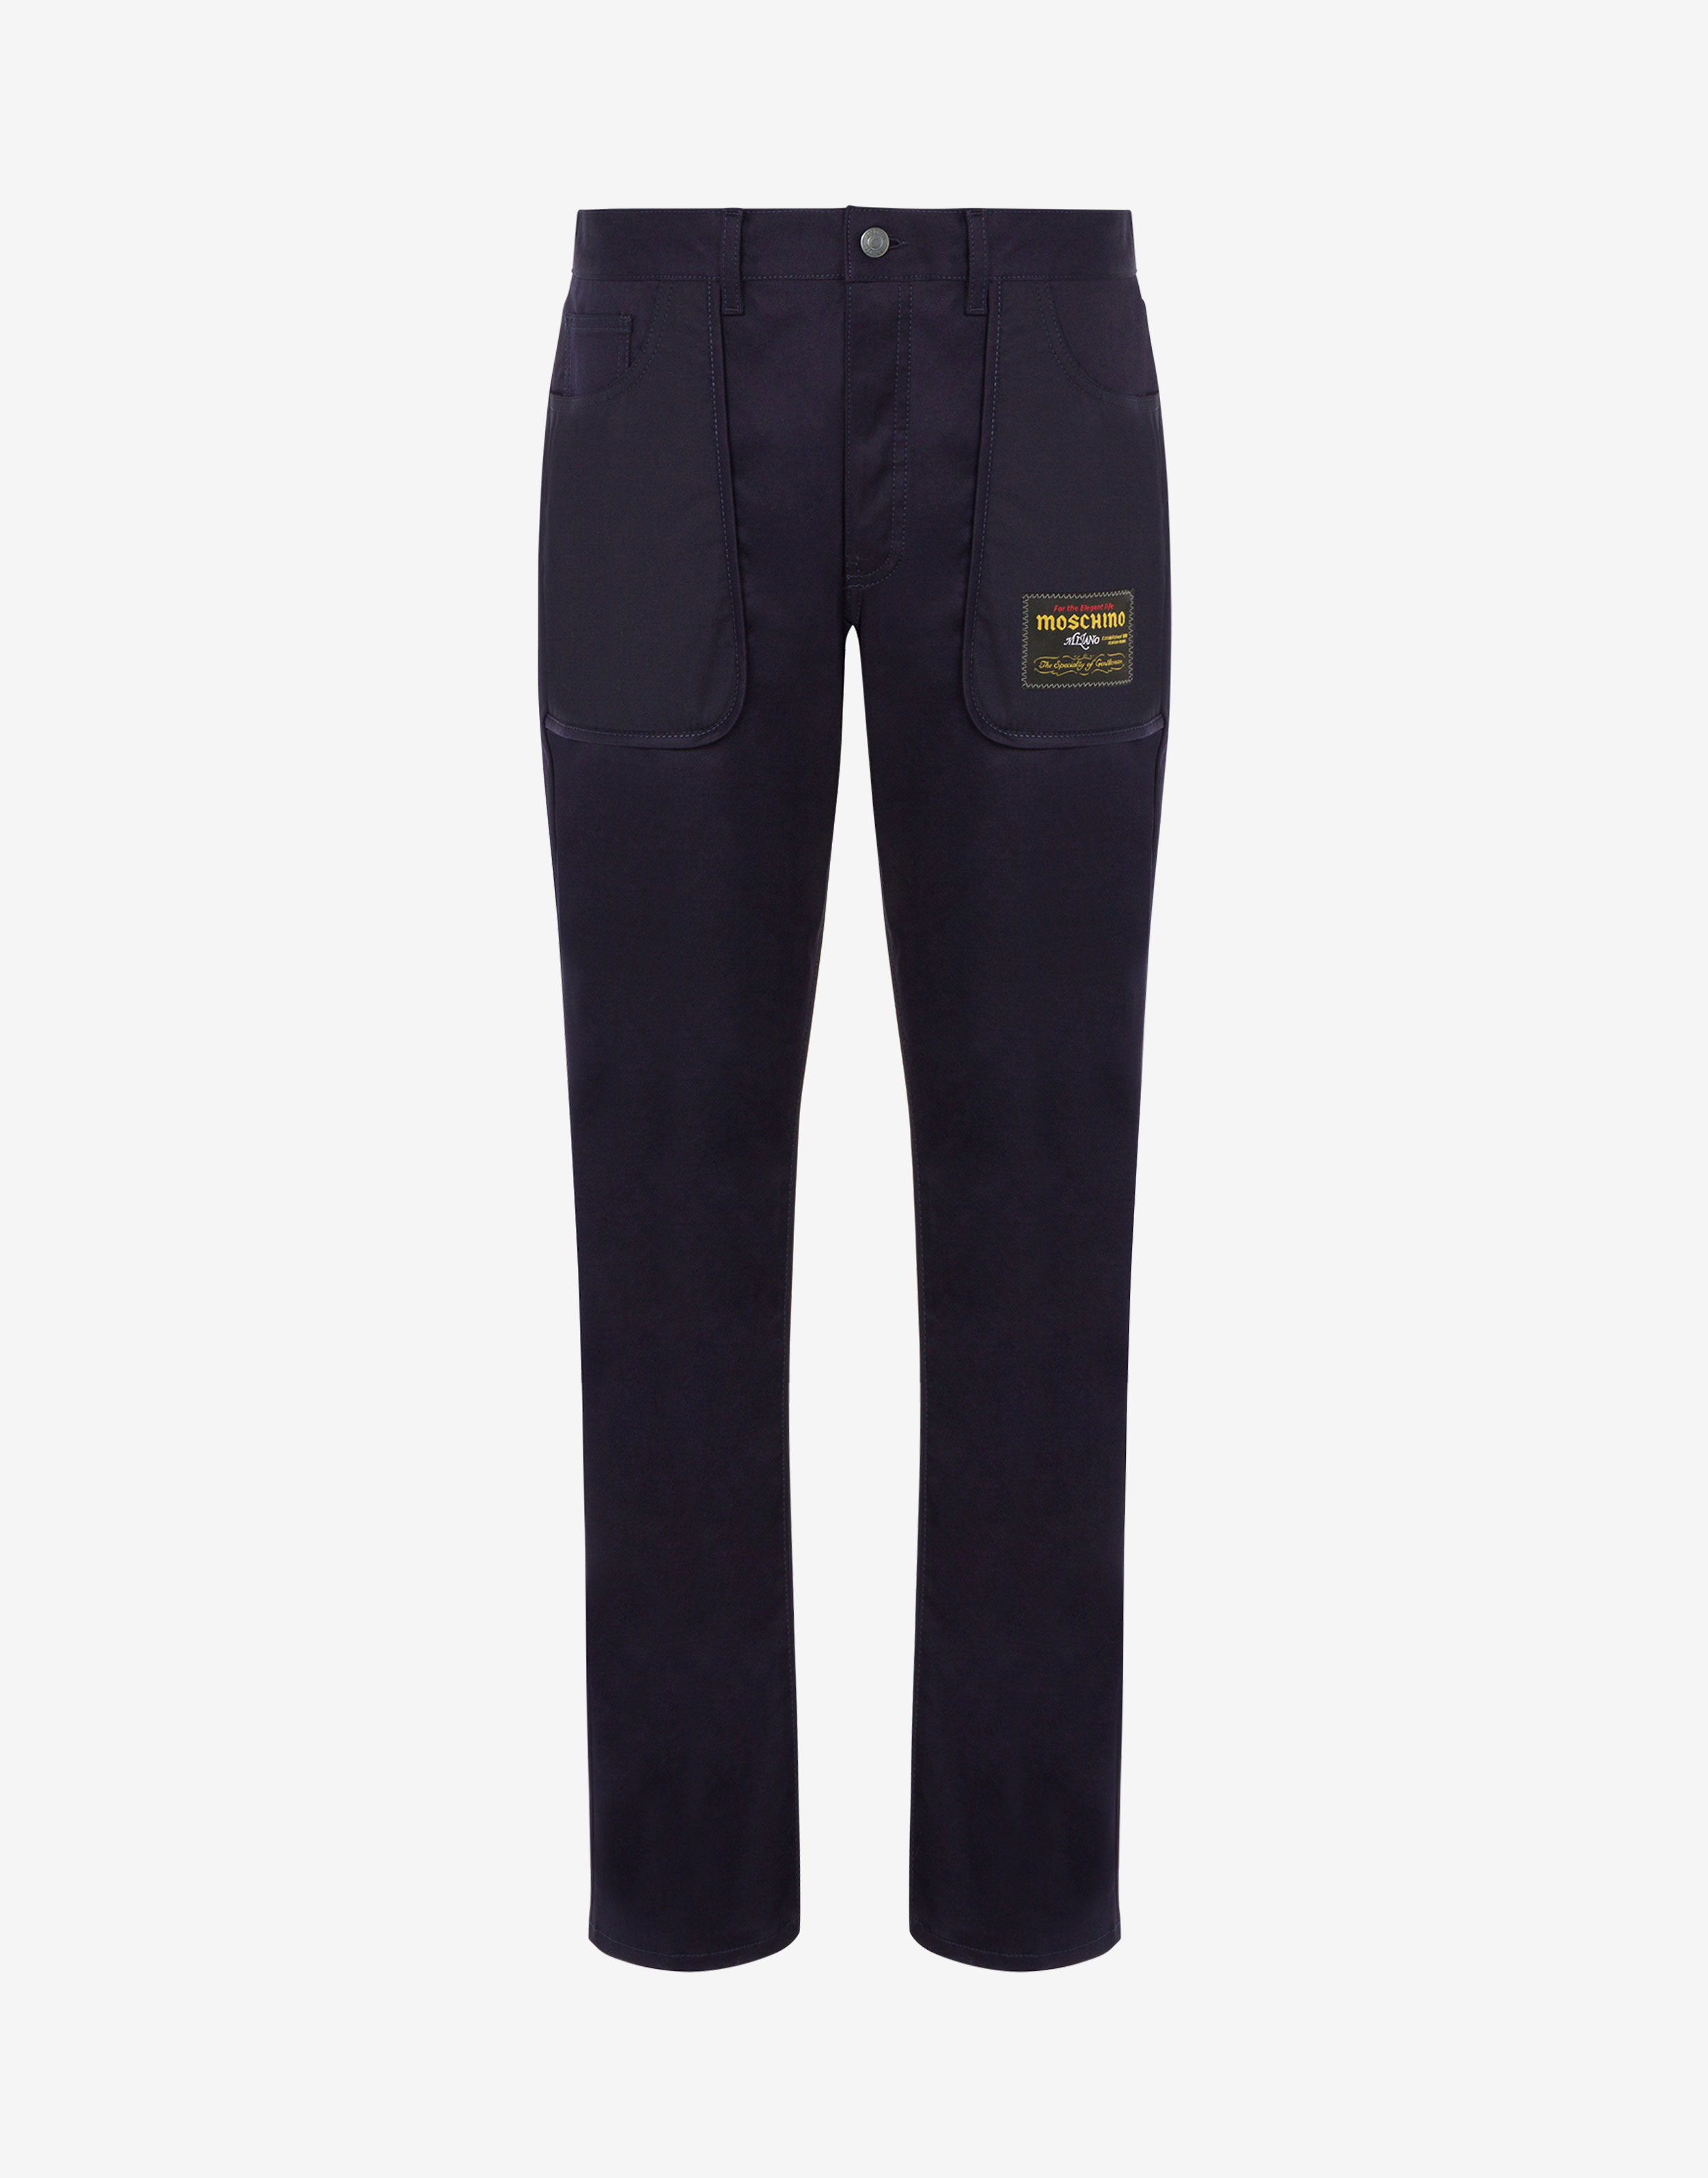 Moschino Pants for Sale - Official Store